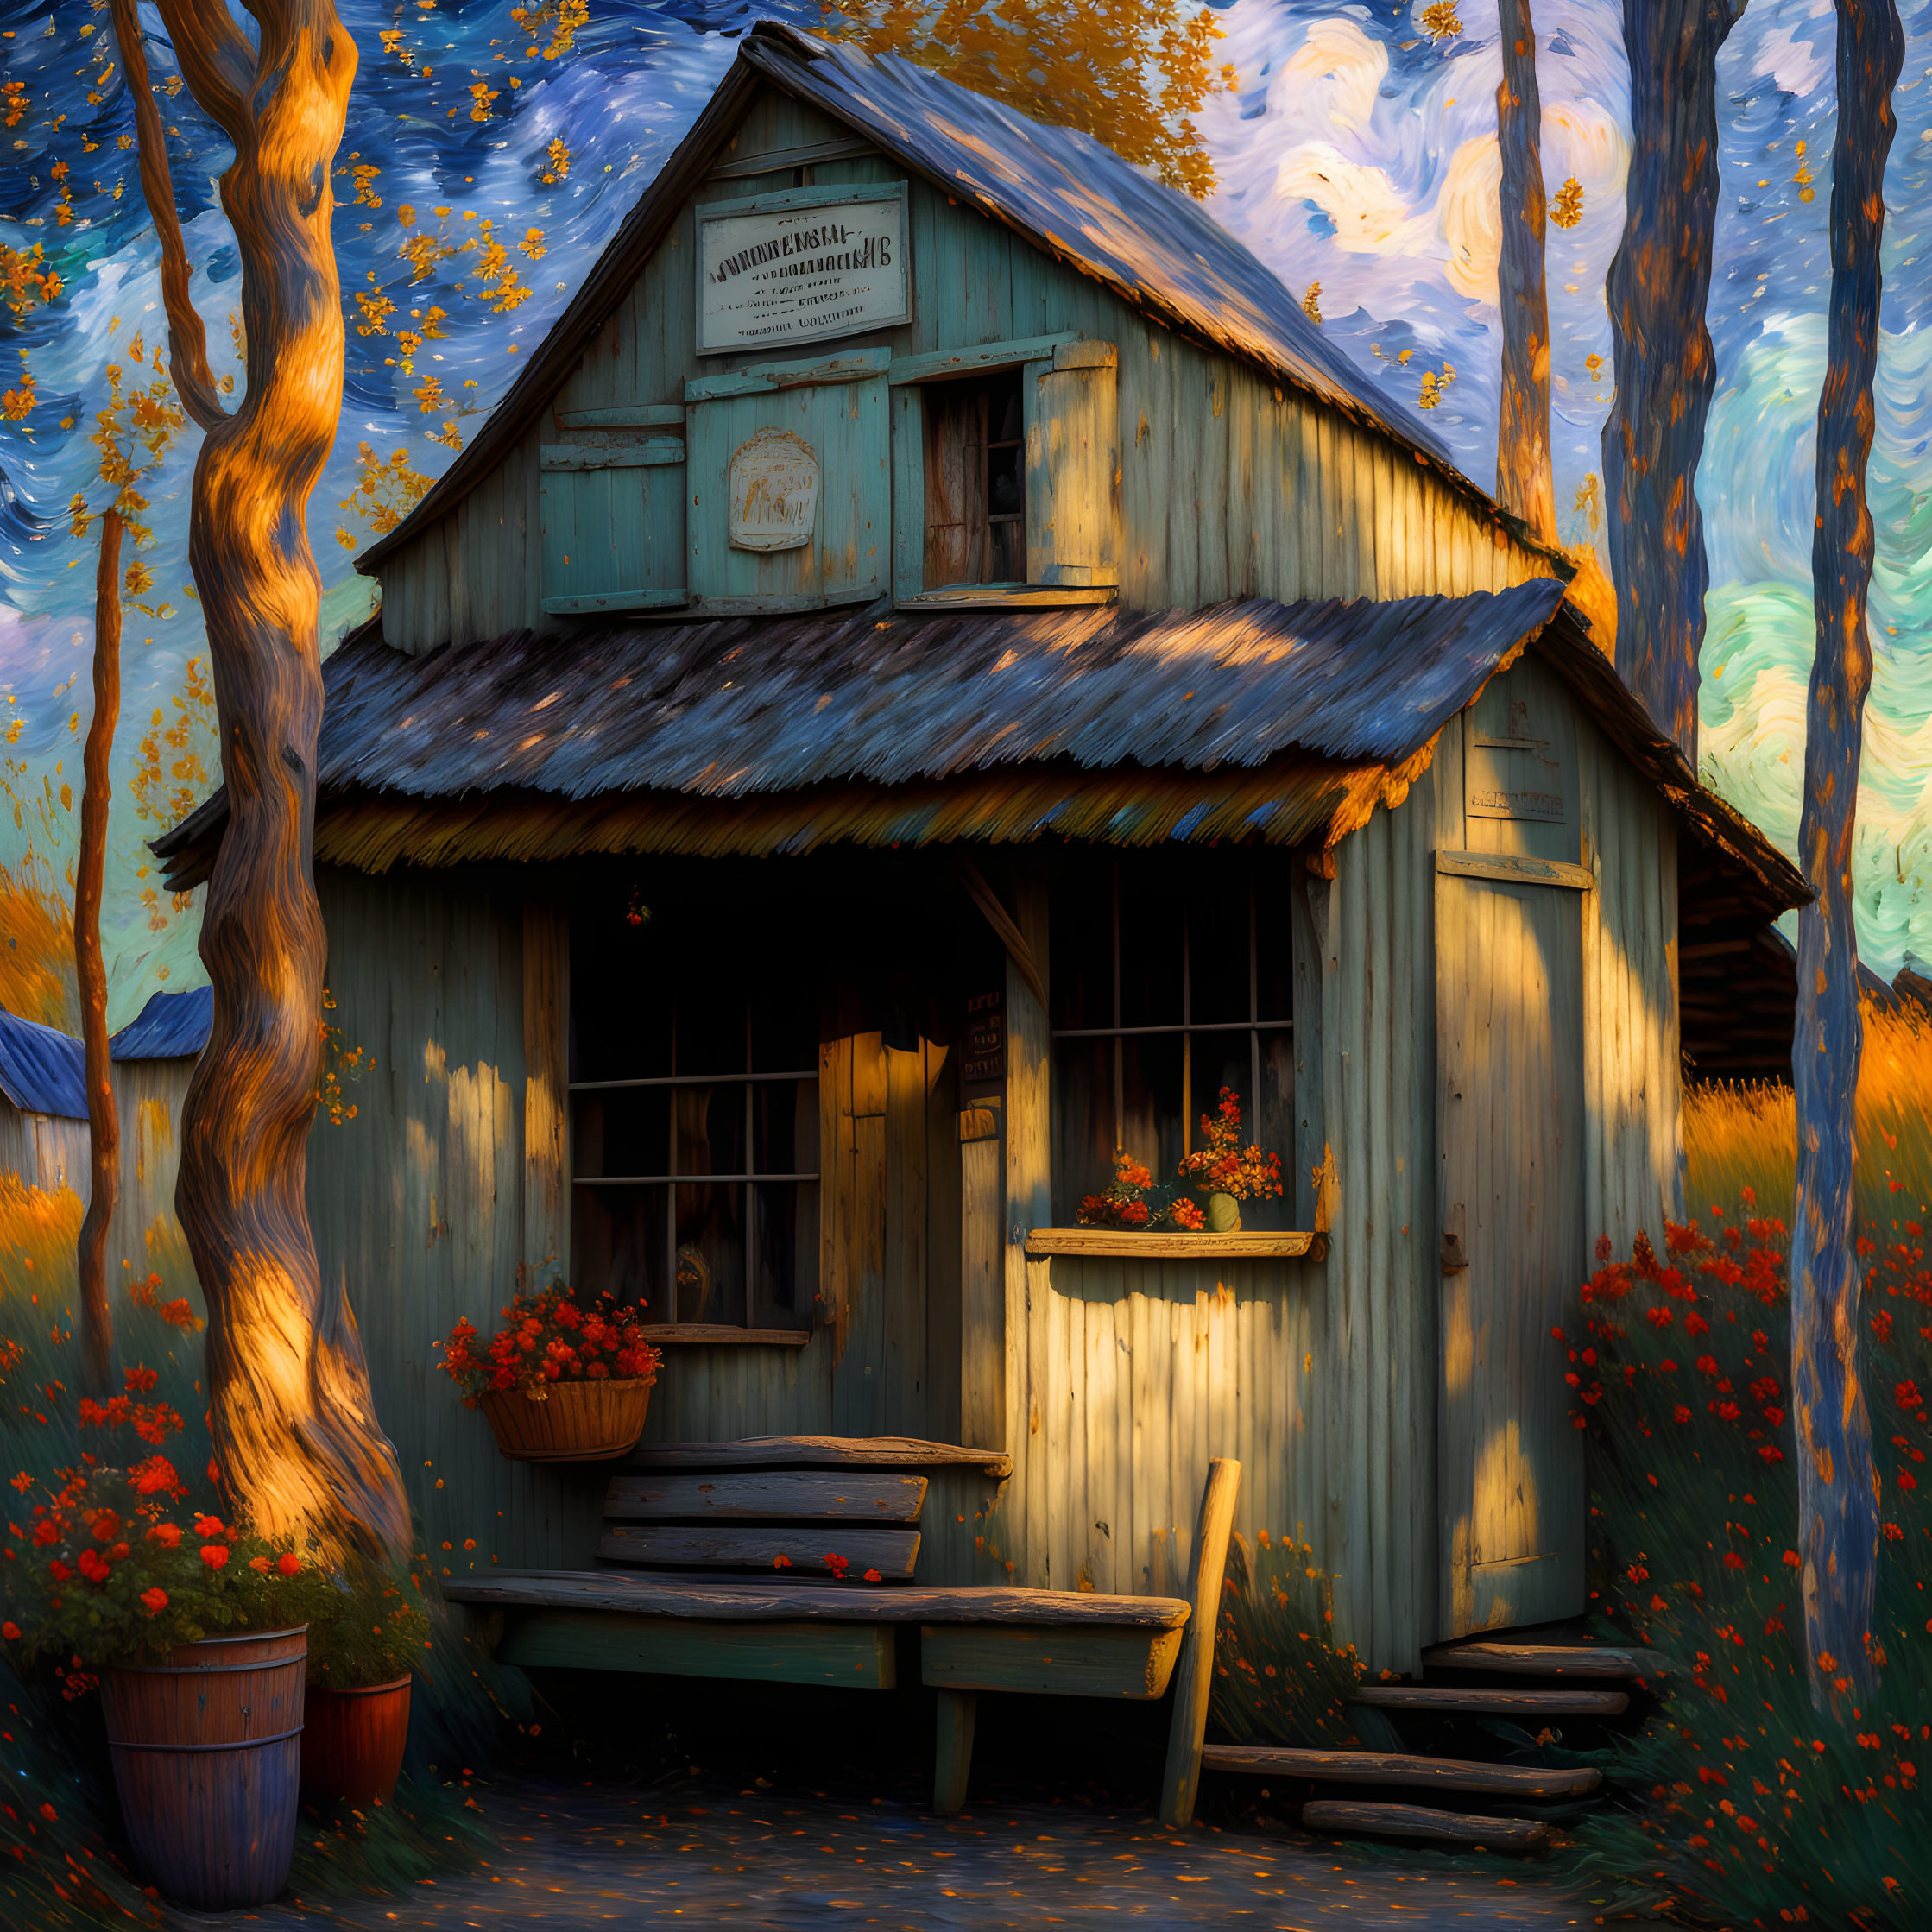 Cozy wooden cottage with autumn trees and flowers